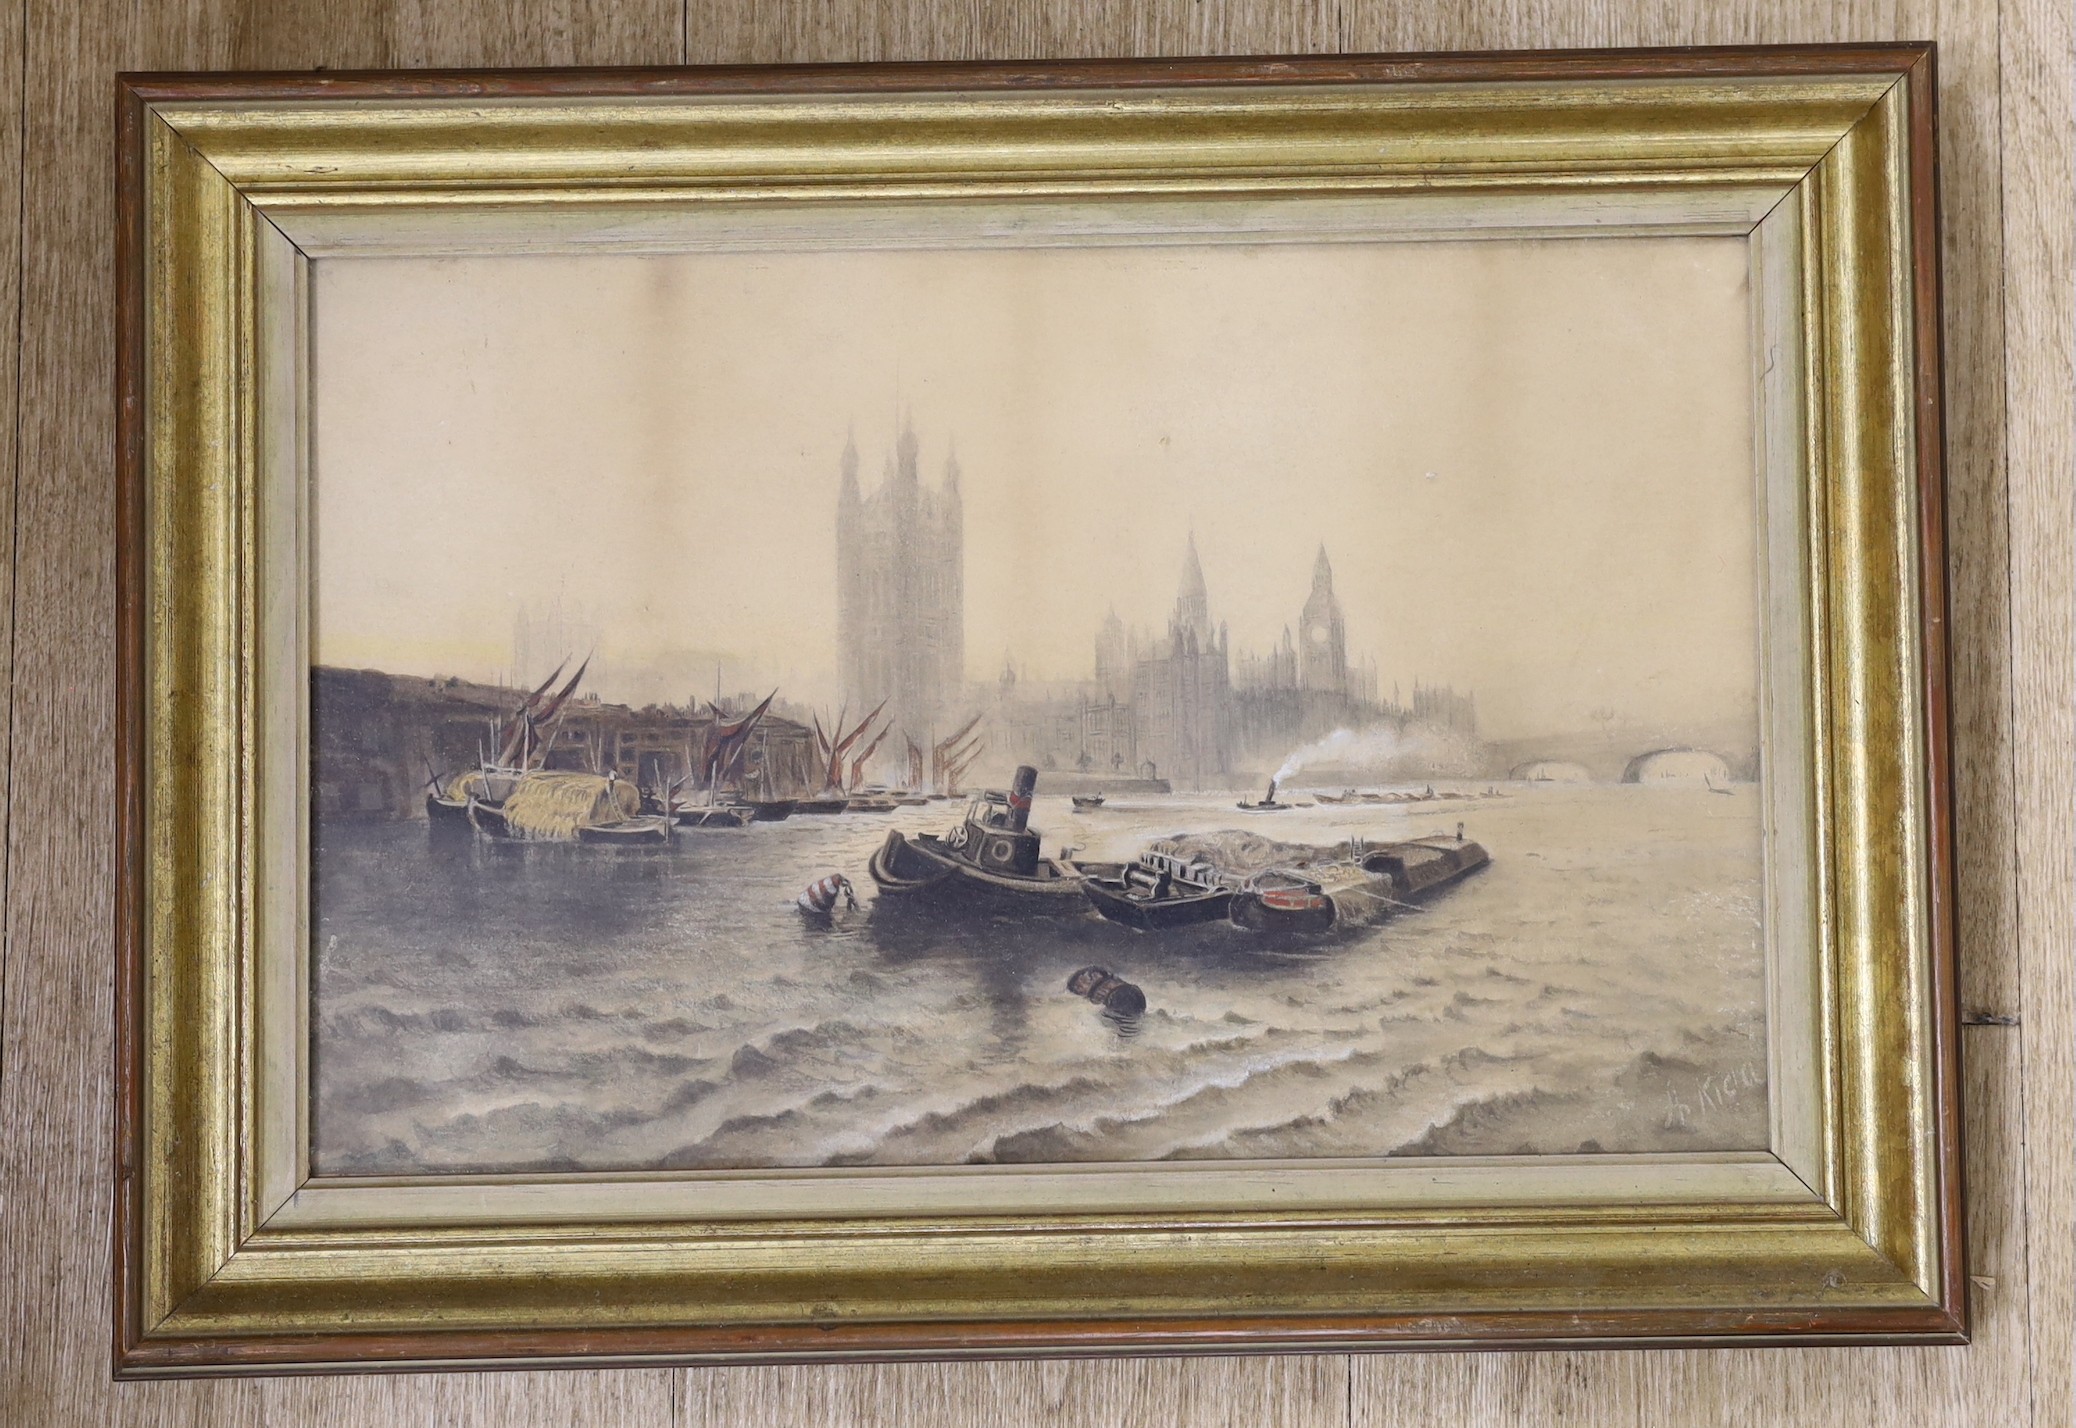 A. Kidd, watercolour, Barges before the Palace of Westminster, signed, 24 x 39cm